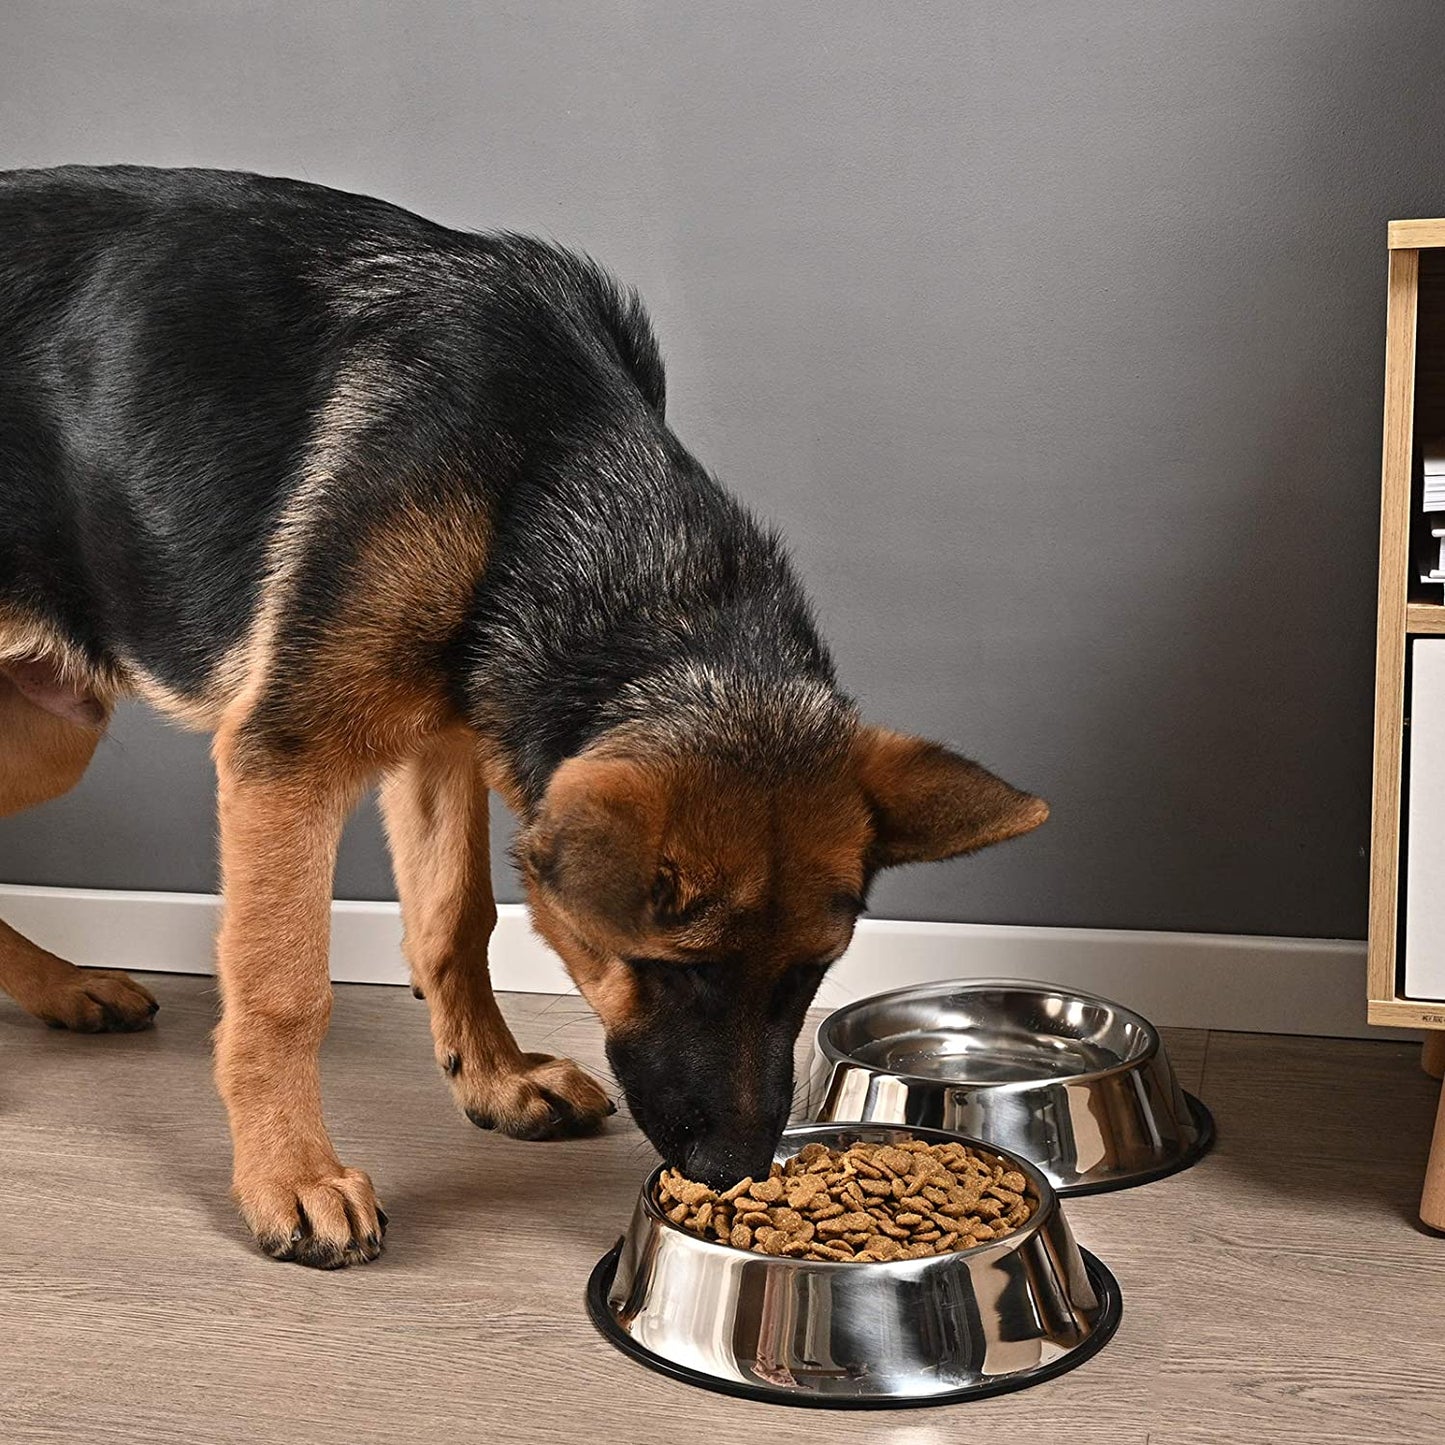 2Packs Stainless Steel Dog Bowl with Anti-Skid Rubber Base for Dog Puppy Cat and Kitten